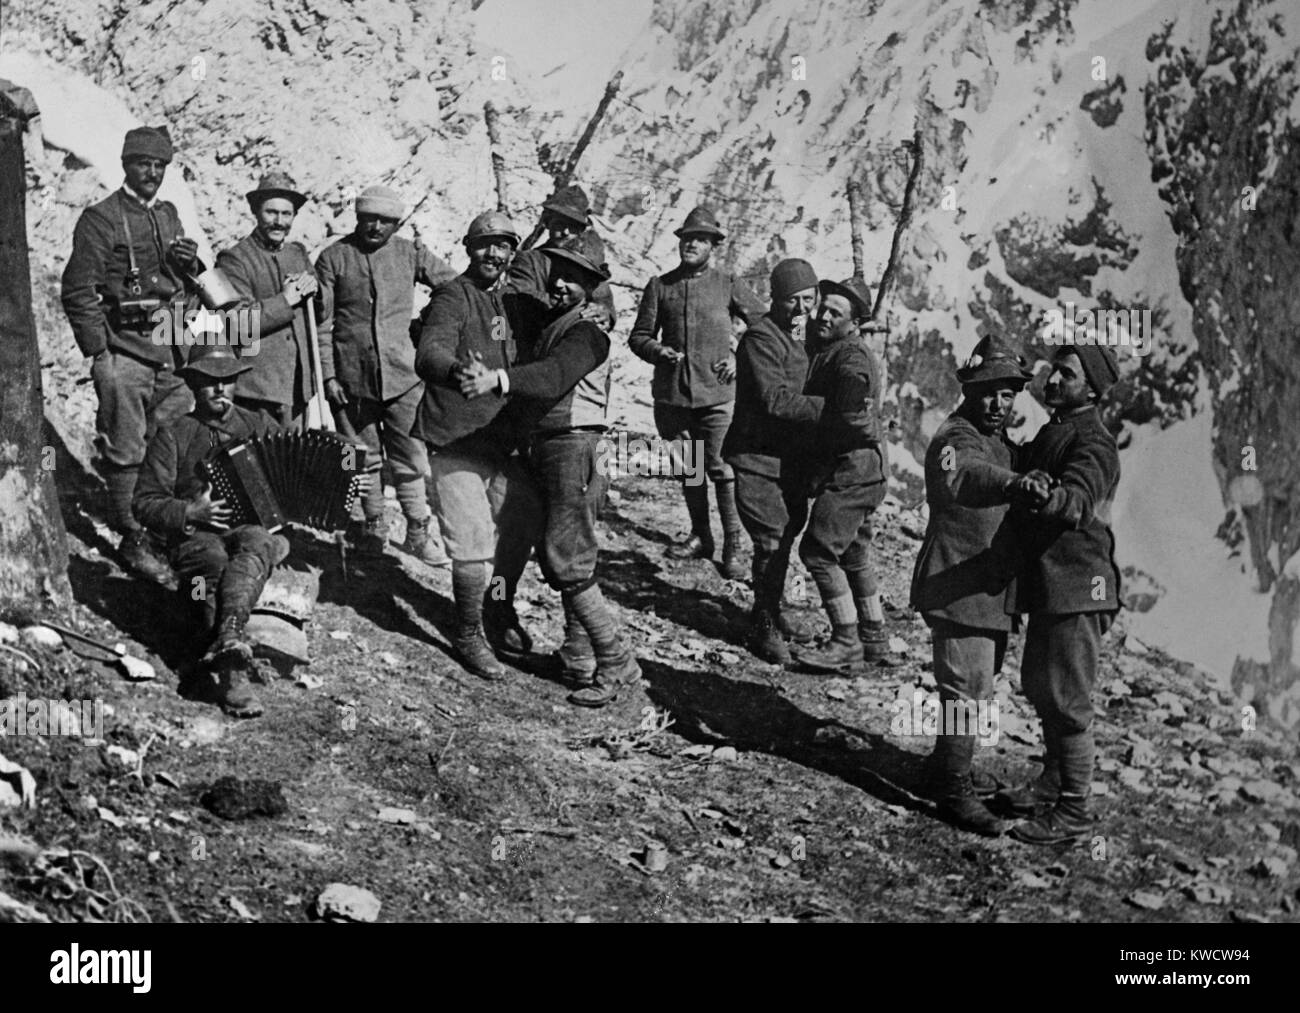 World War 1 in the Italian and Austria Alps. Italian soldiers at mountain outpost dance in pairs, accompanied by an accordion. Ca. 1915-17. (BSLOC 2013 1 26) Stock Photo